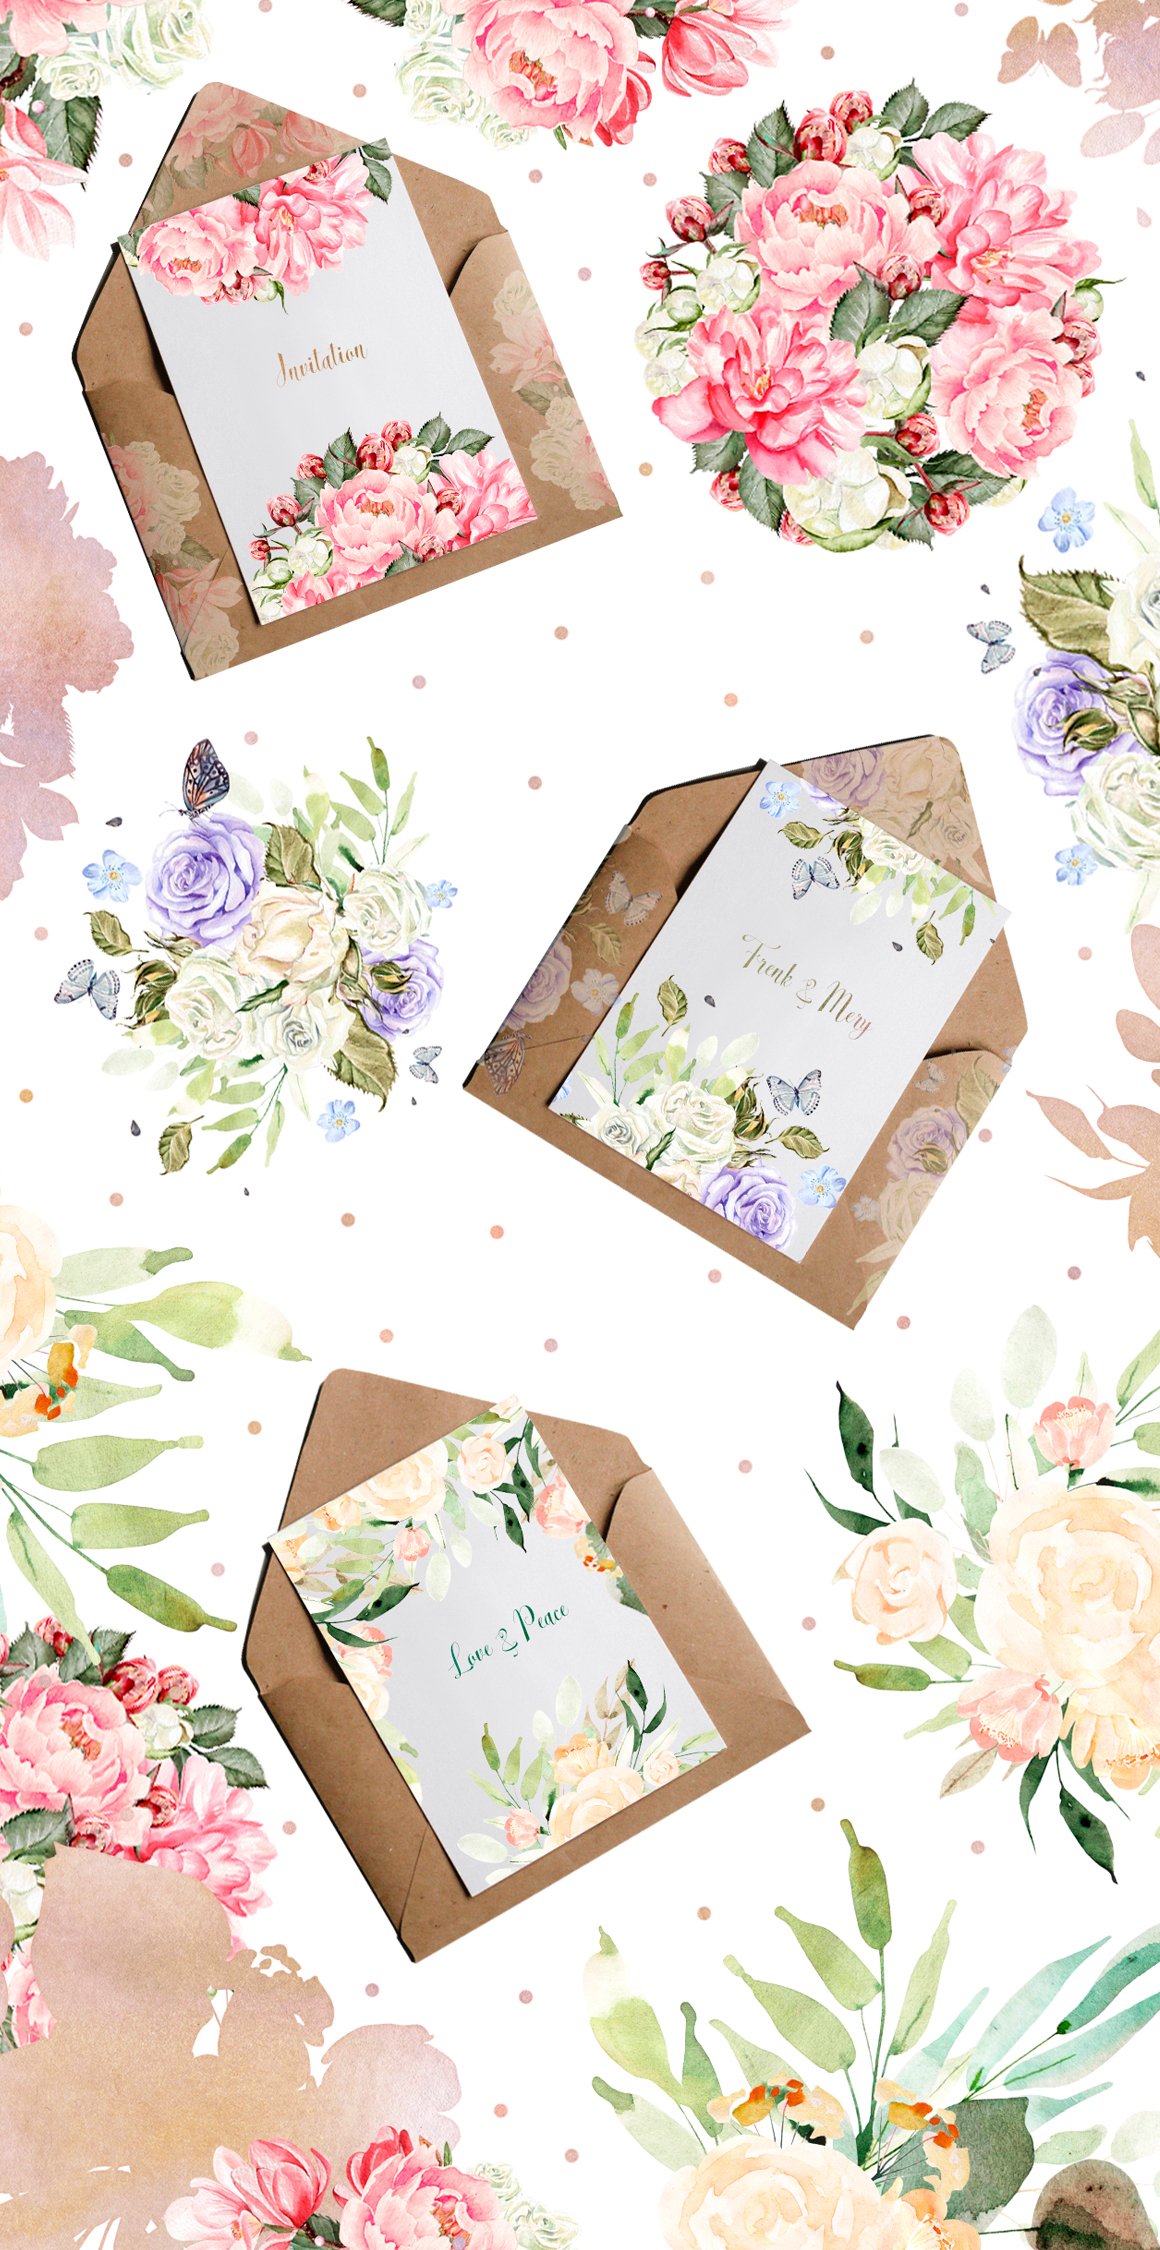 45 Hand Drawn Watercolor Bouquet & Wreath Pack